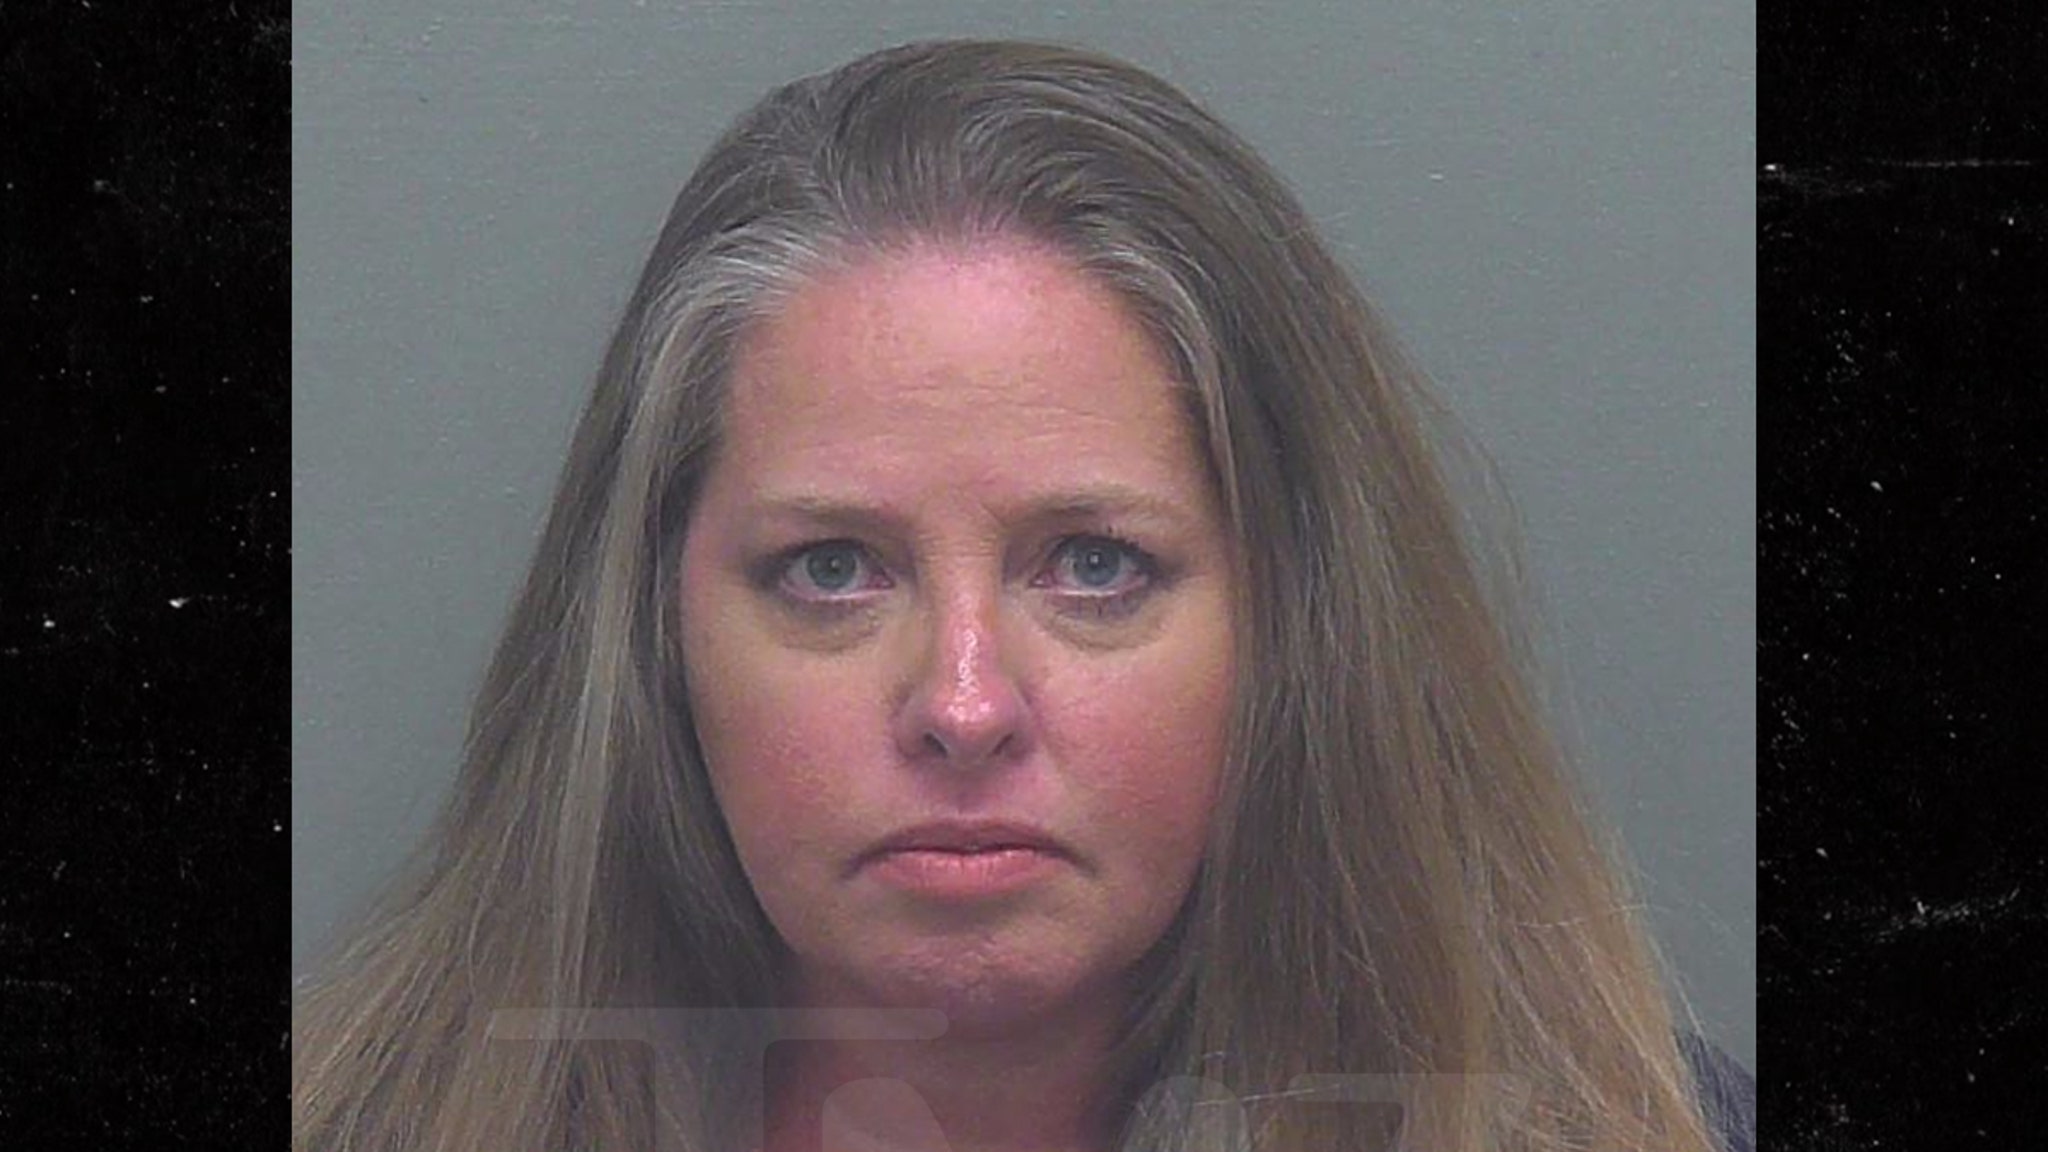 TLC's "Welcome To Plathville" Kim Plath arrested for drunk driving